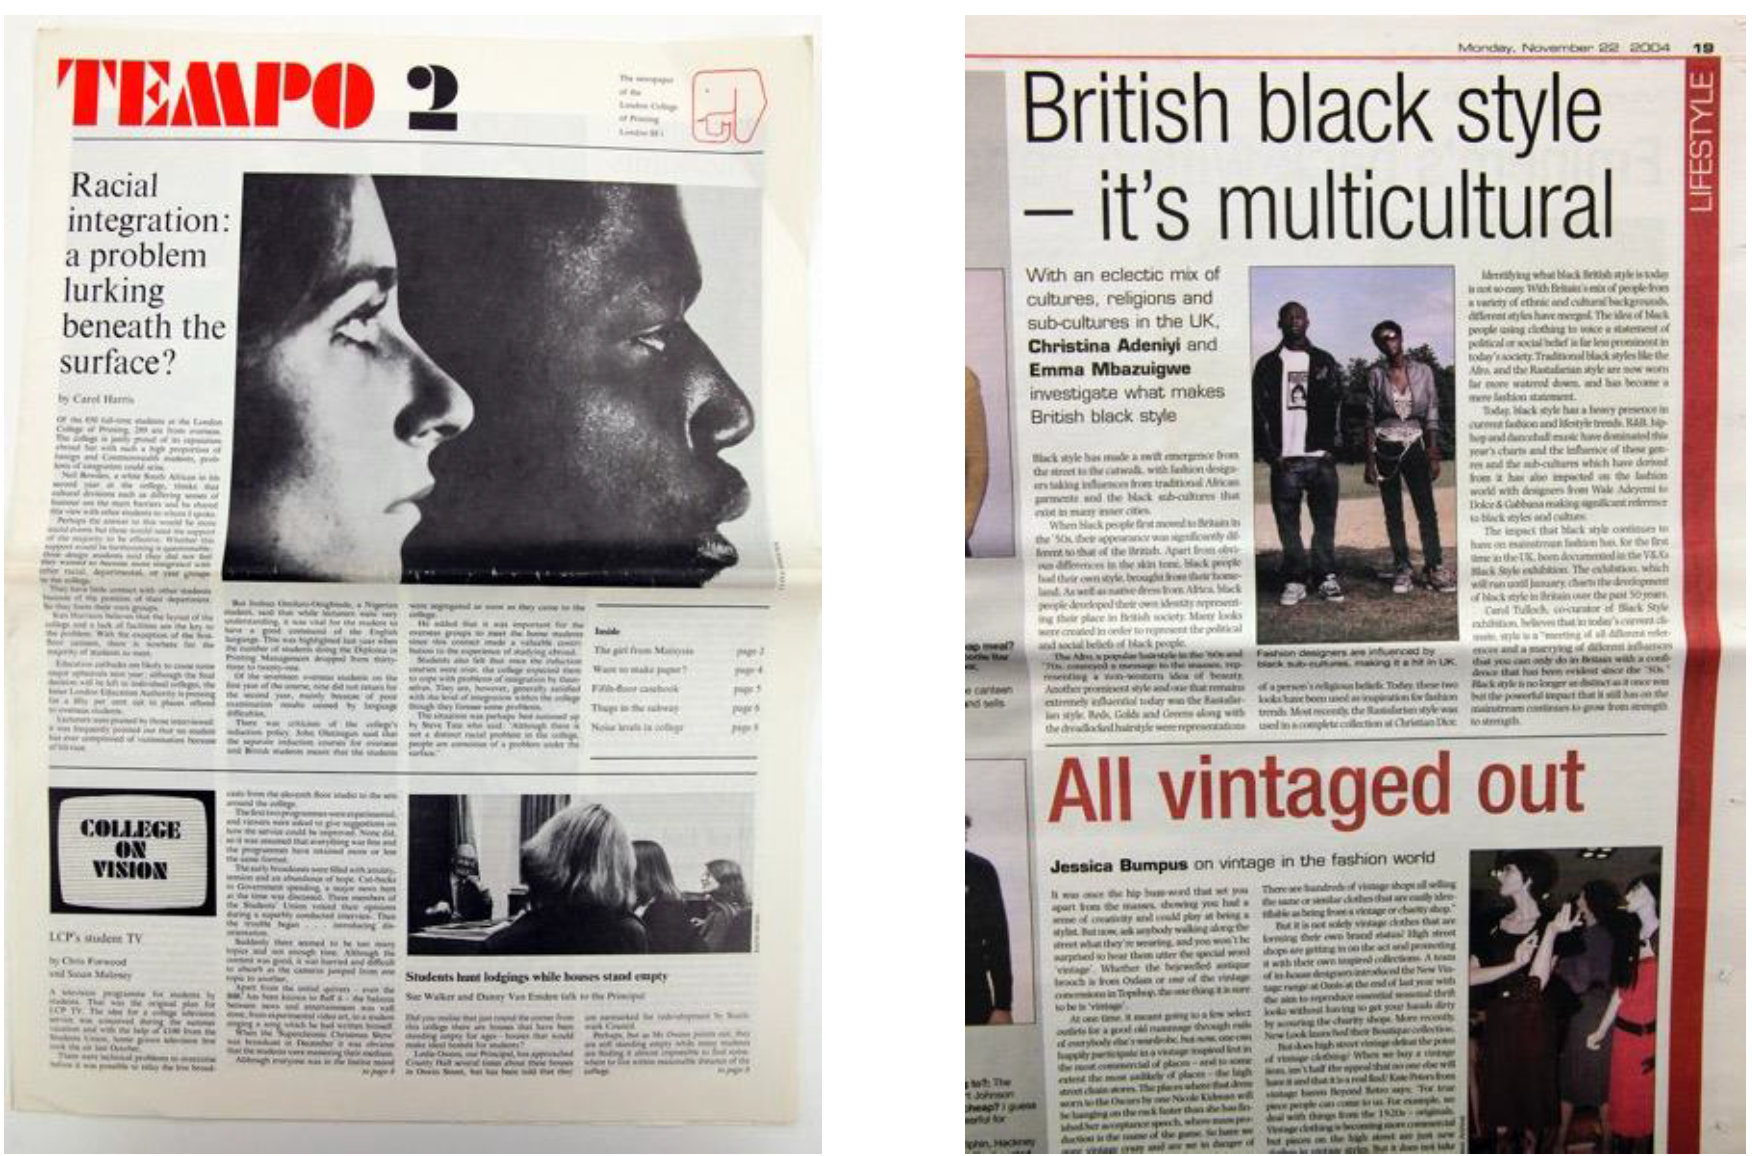 2 broadsheet newspaper pages side by side, with articles on Black style and culture and racial integration 